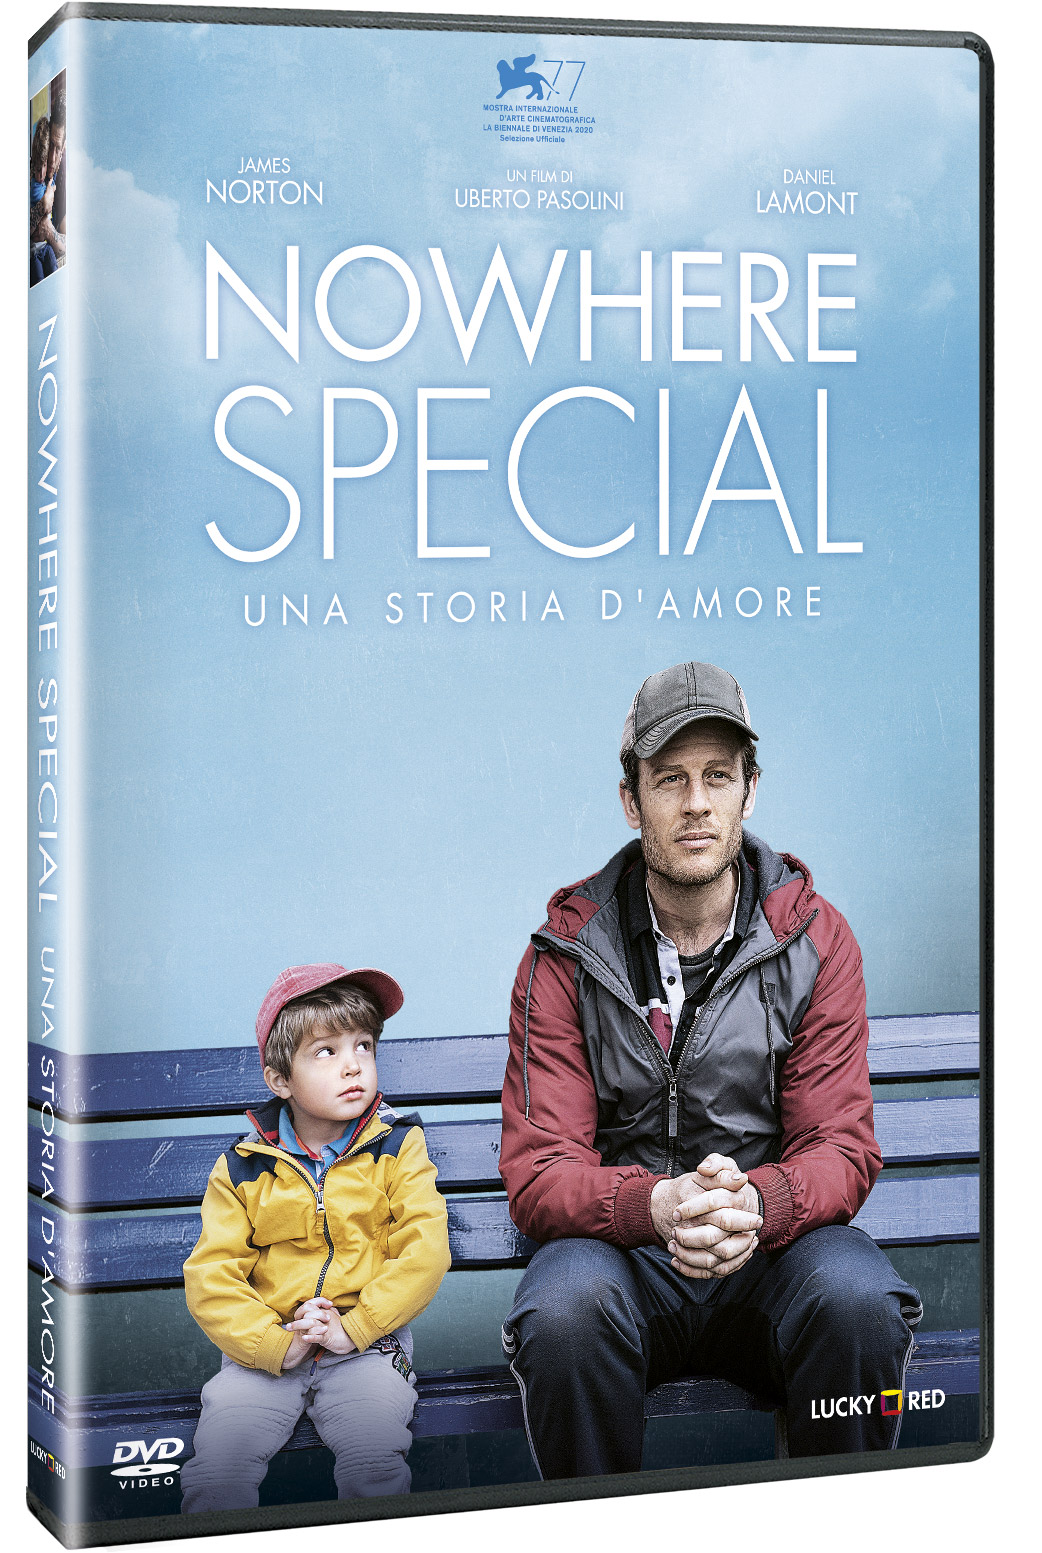 Nowhere special in DVD